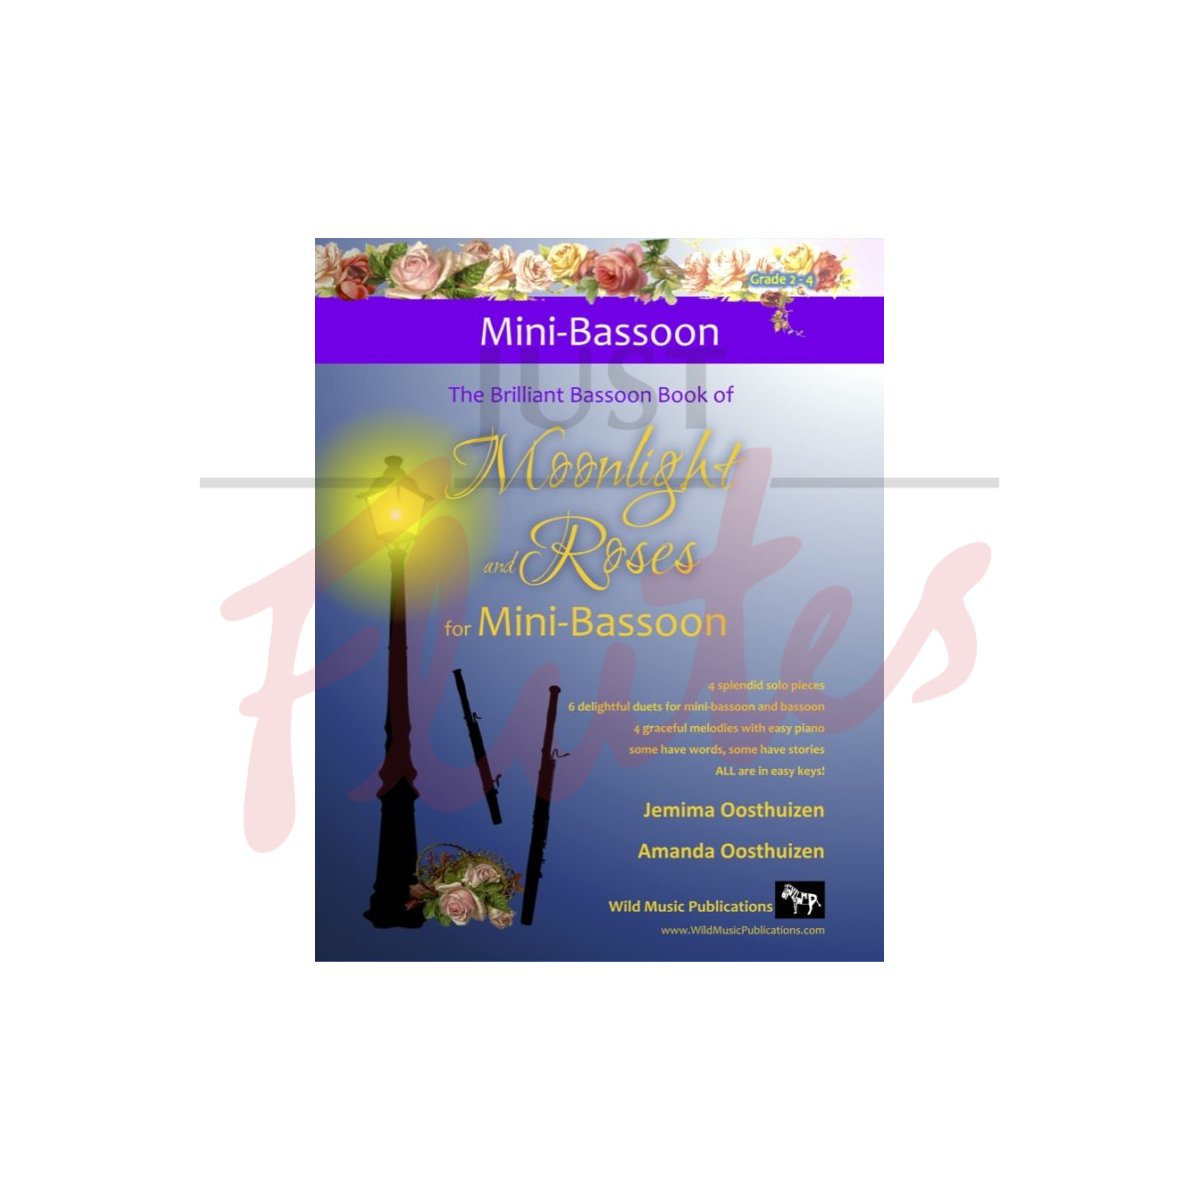 The Brilliant Bassoon Book of Moonlight and Roses for Mini-Bassoon